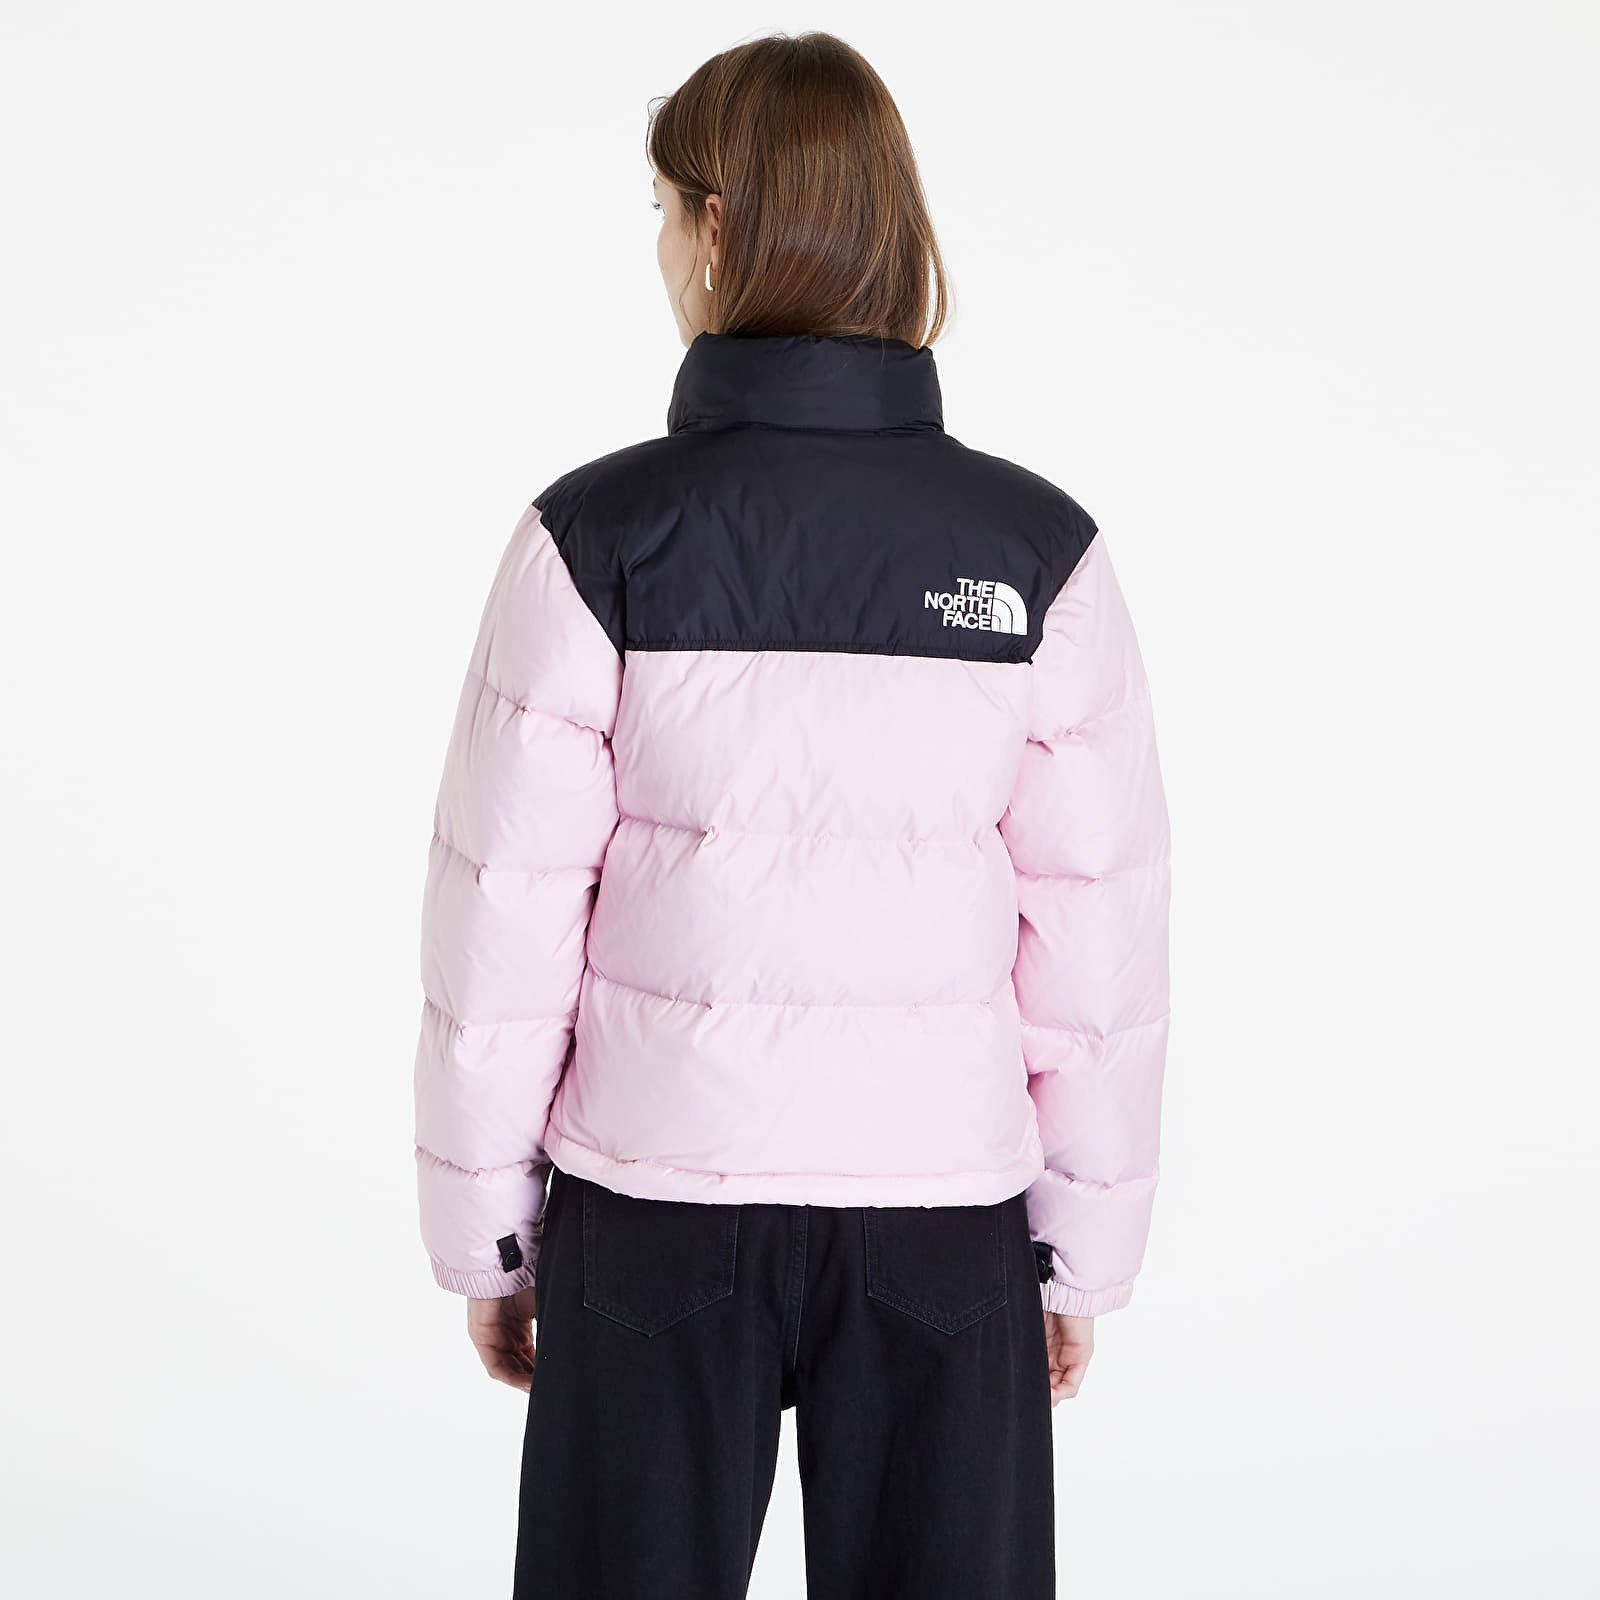 Puffer jacket The North Face 1996 Retro Nuptse Jacket NF0A3XEO6R01 